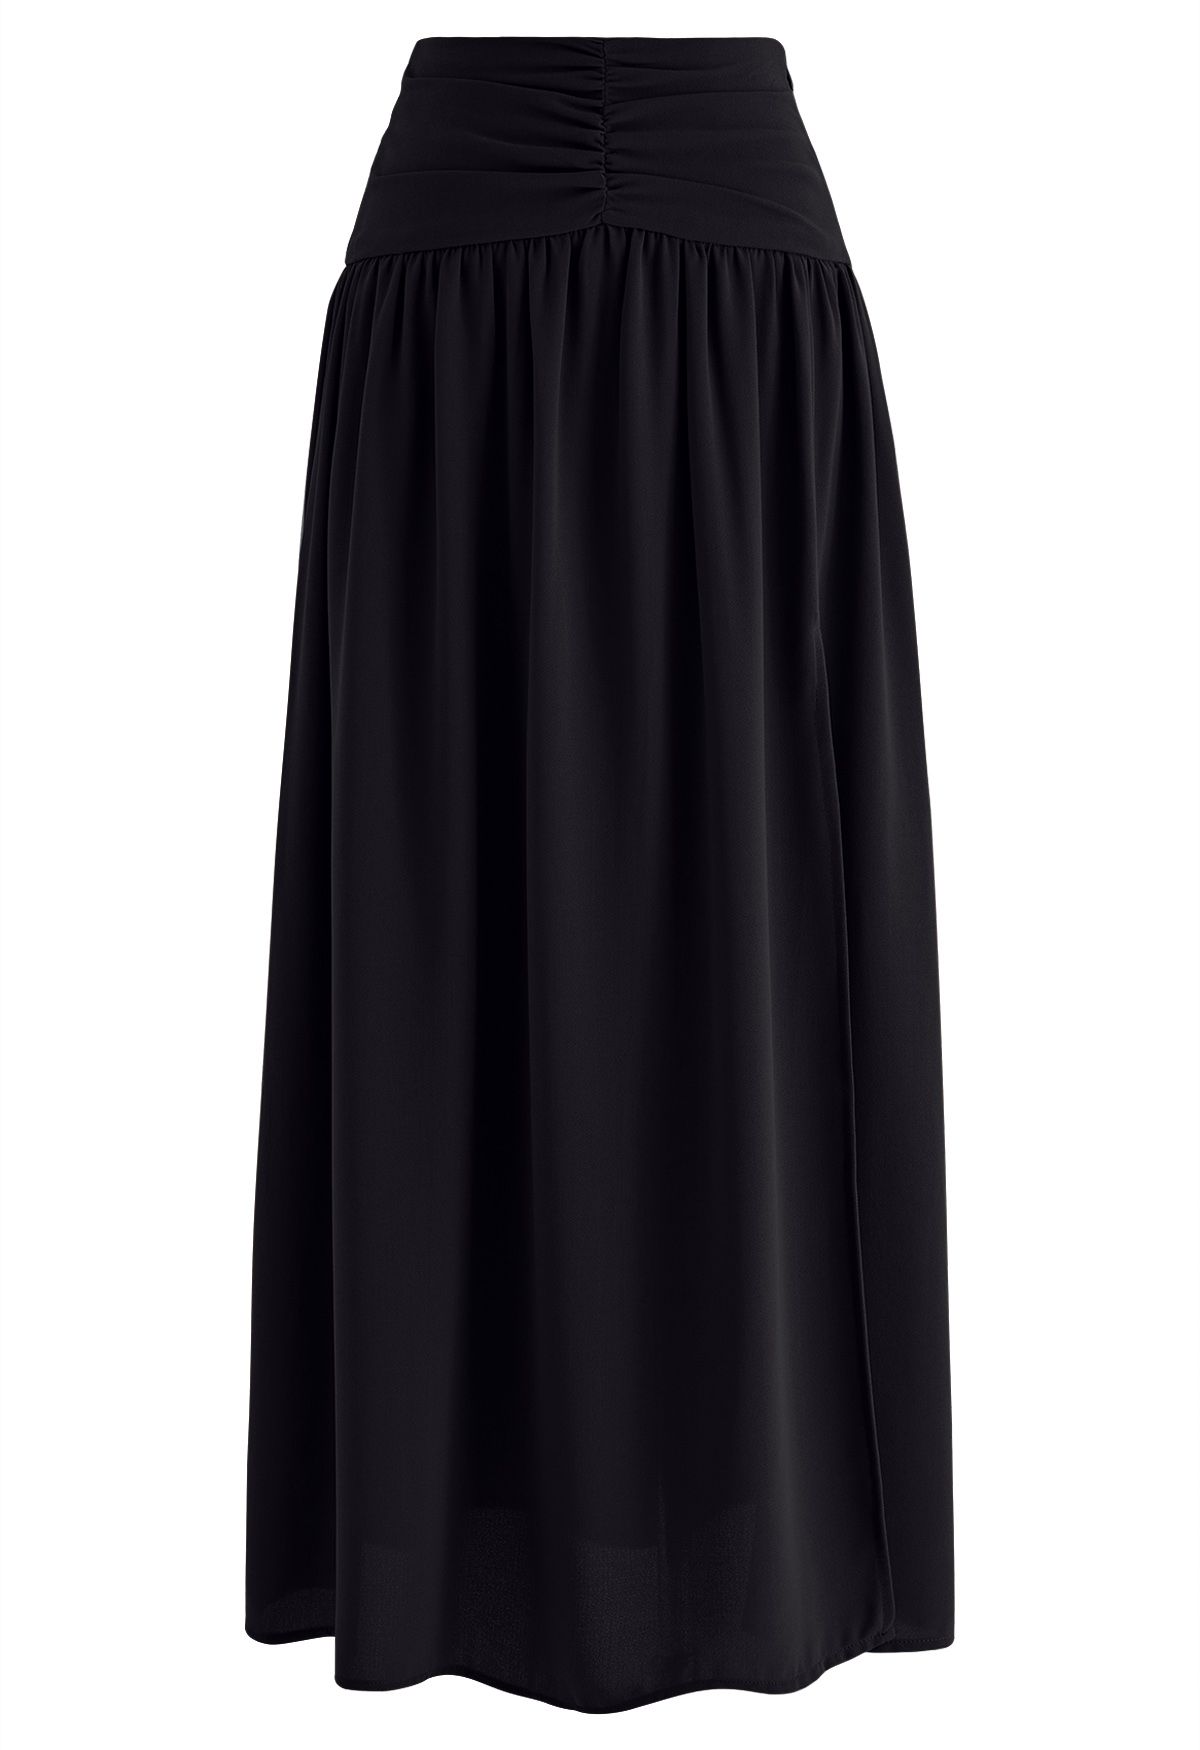 Ruched Waist Slit Maxi Skirt in Black - Retro, Indie and Unique Fashion